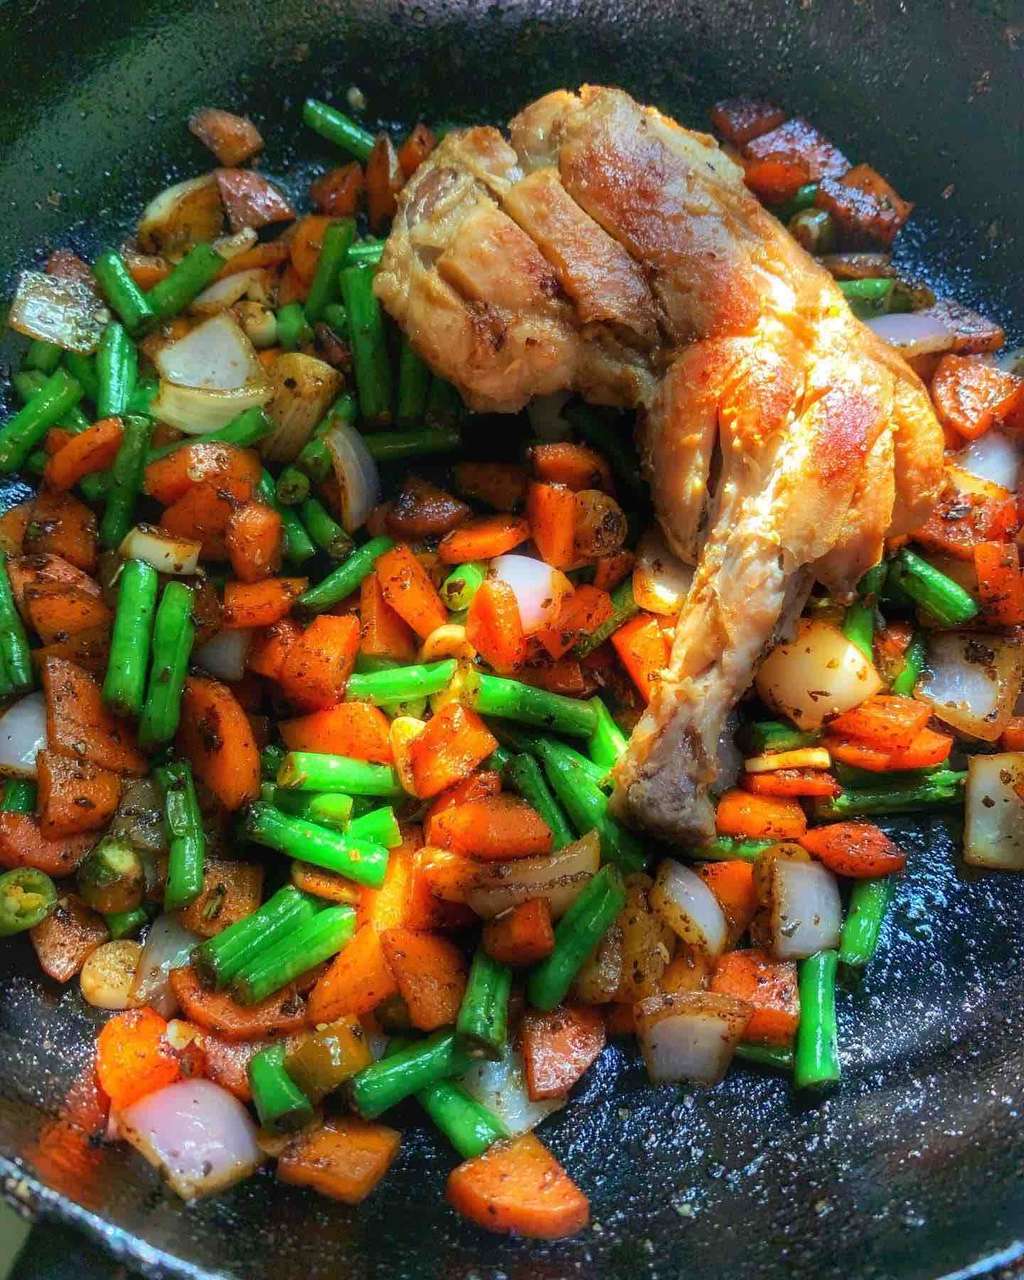 Pan fried chicken with veggies. 